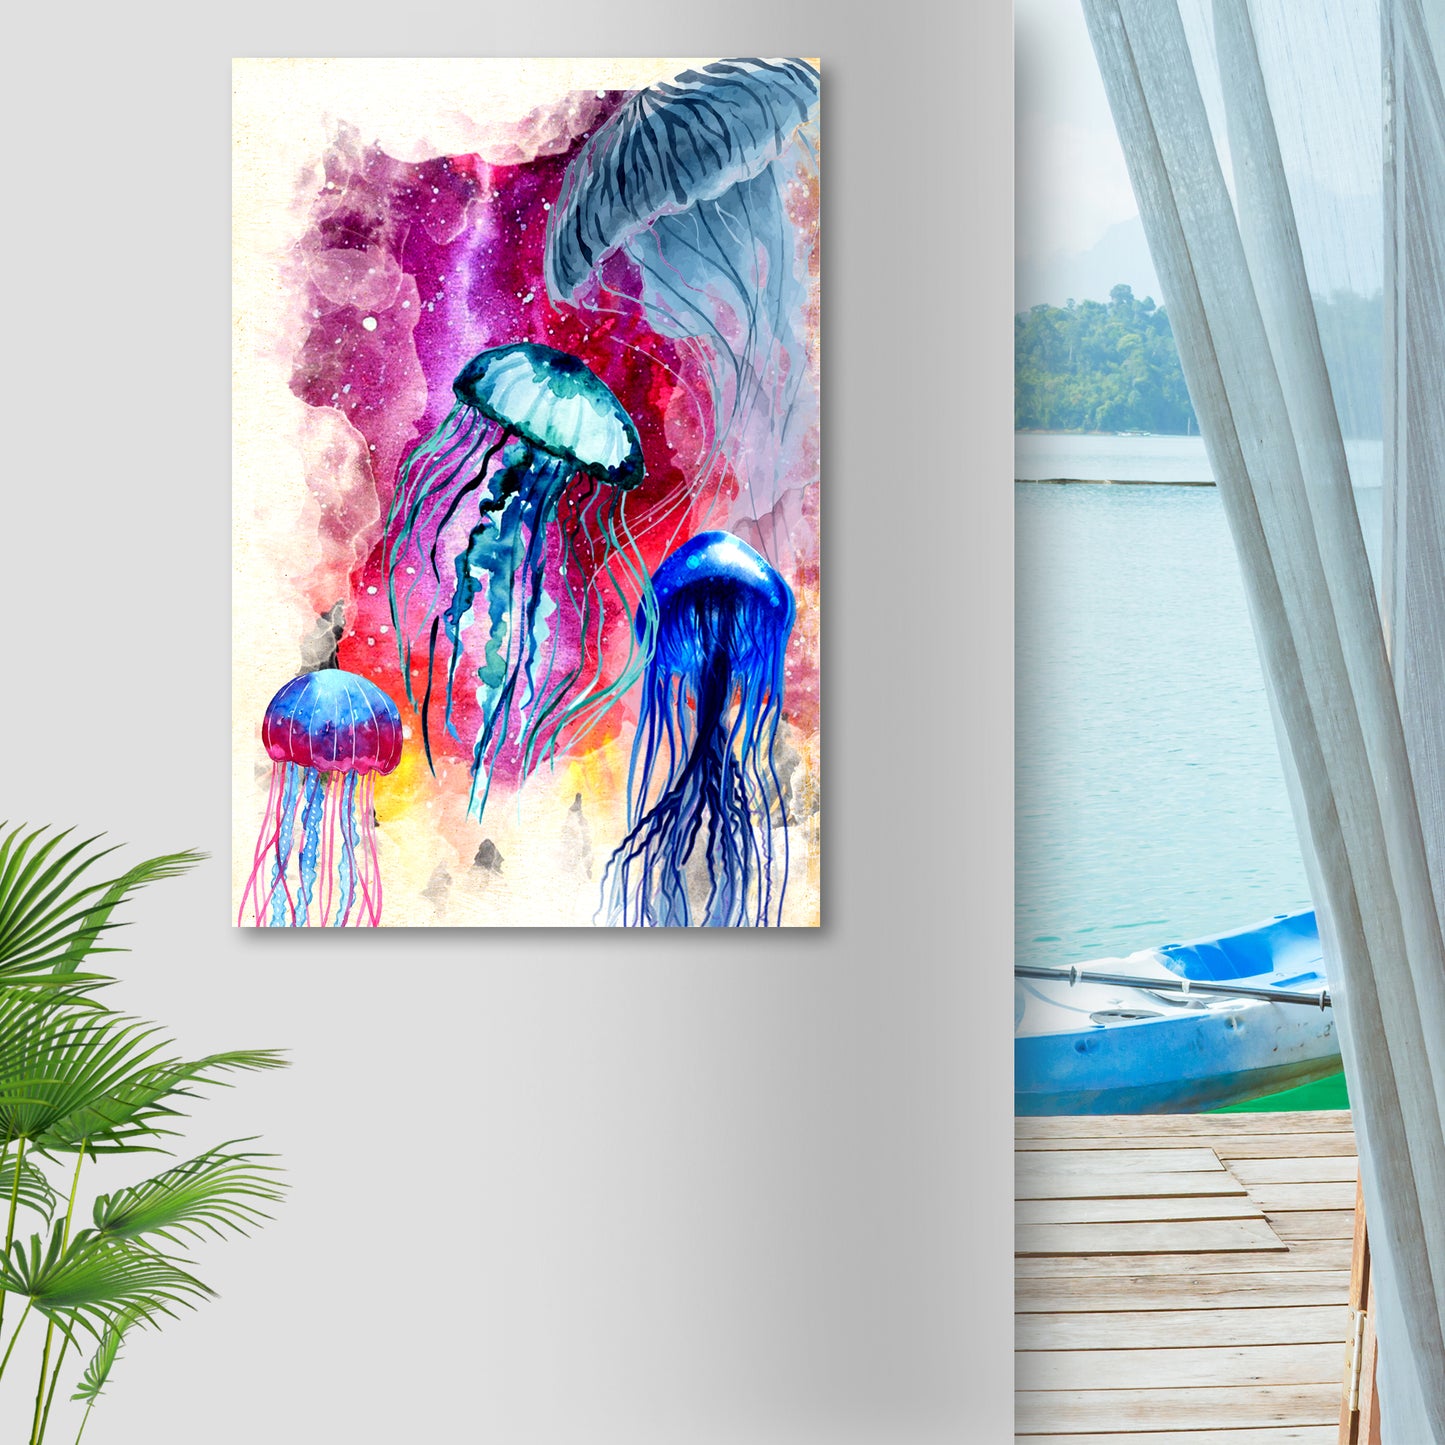 Galaxy Jellyfish Watercolor Portrait Canvas Wall Art - Image by Tailored Canvases